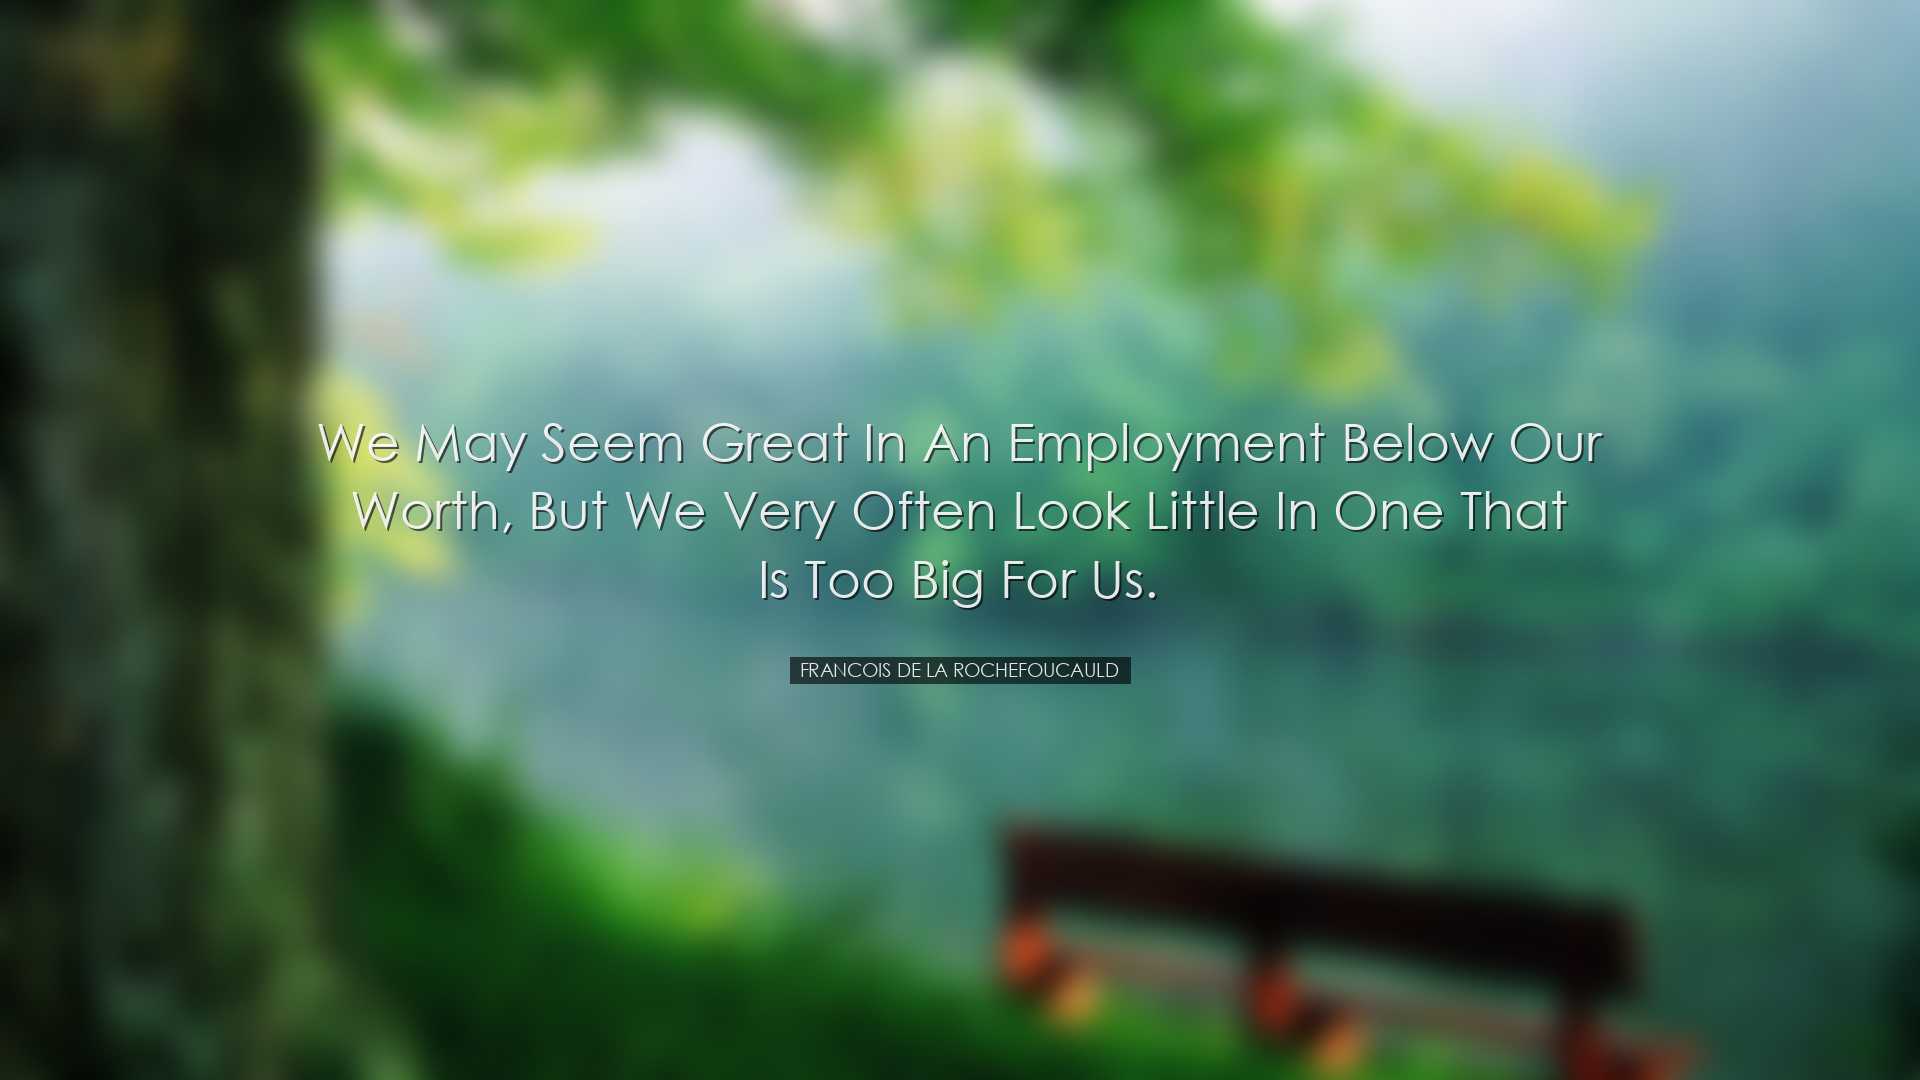 We may seem great in an employment below our worth, but we very of